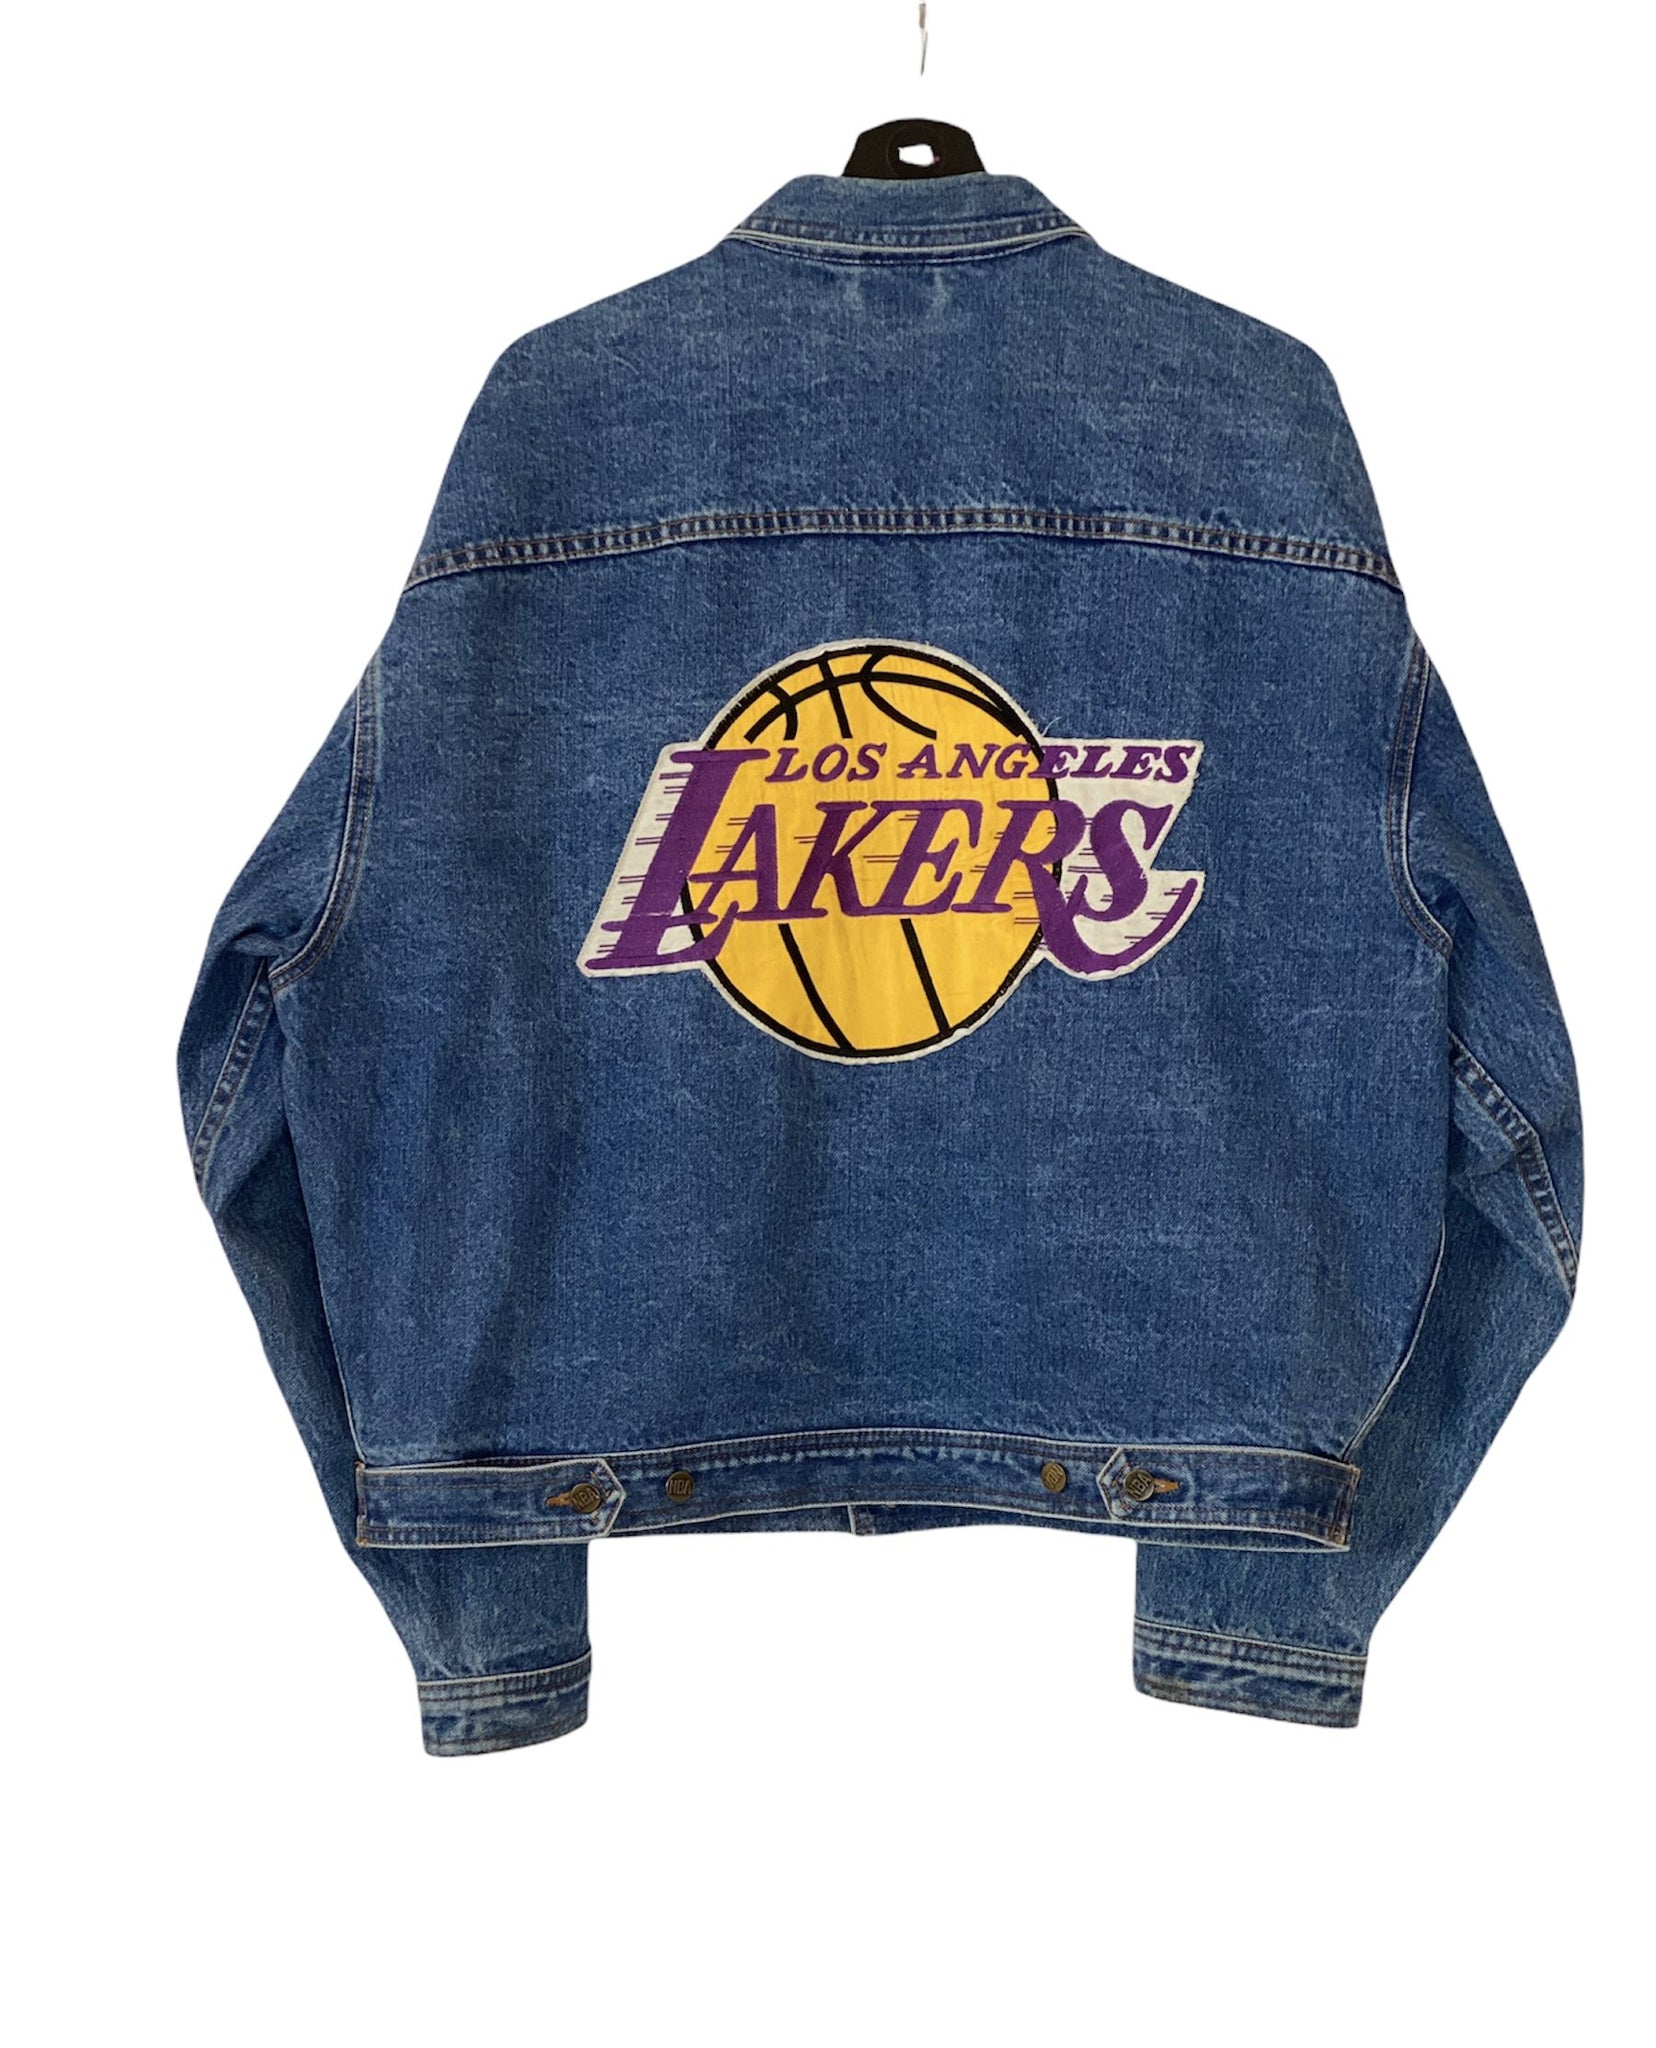 In the Paint Los Angeles Lakers Big Logo embroidered jeans jacket Blue Size Large freeshipping - Unique Pieces Vintage